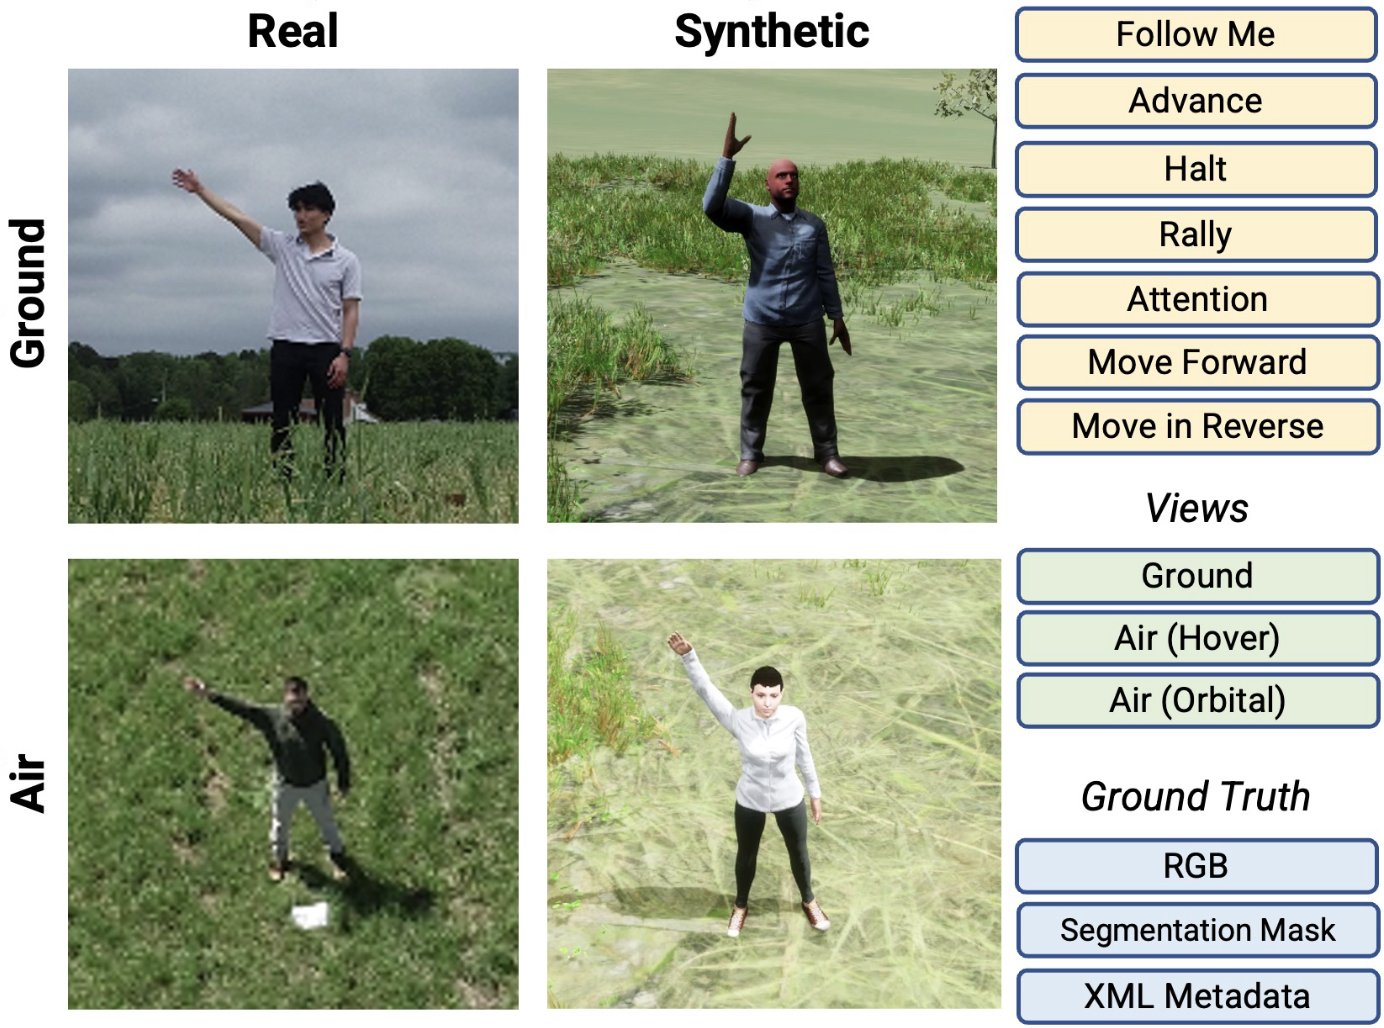 Dataset and baselines for syn-to-real action recognition.